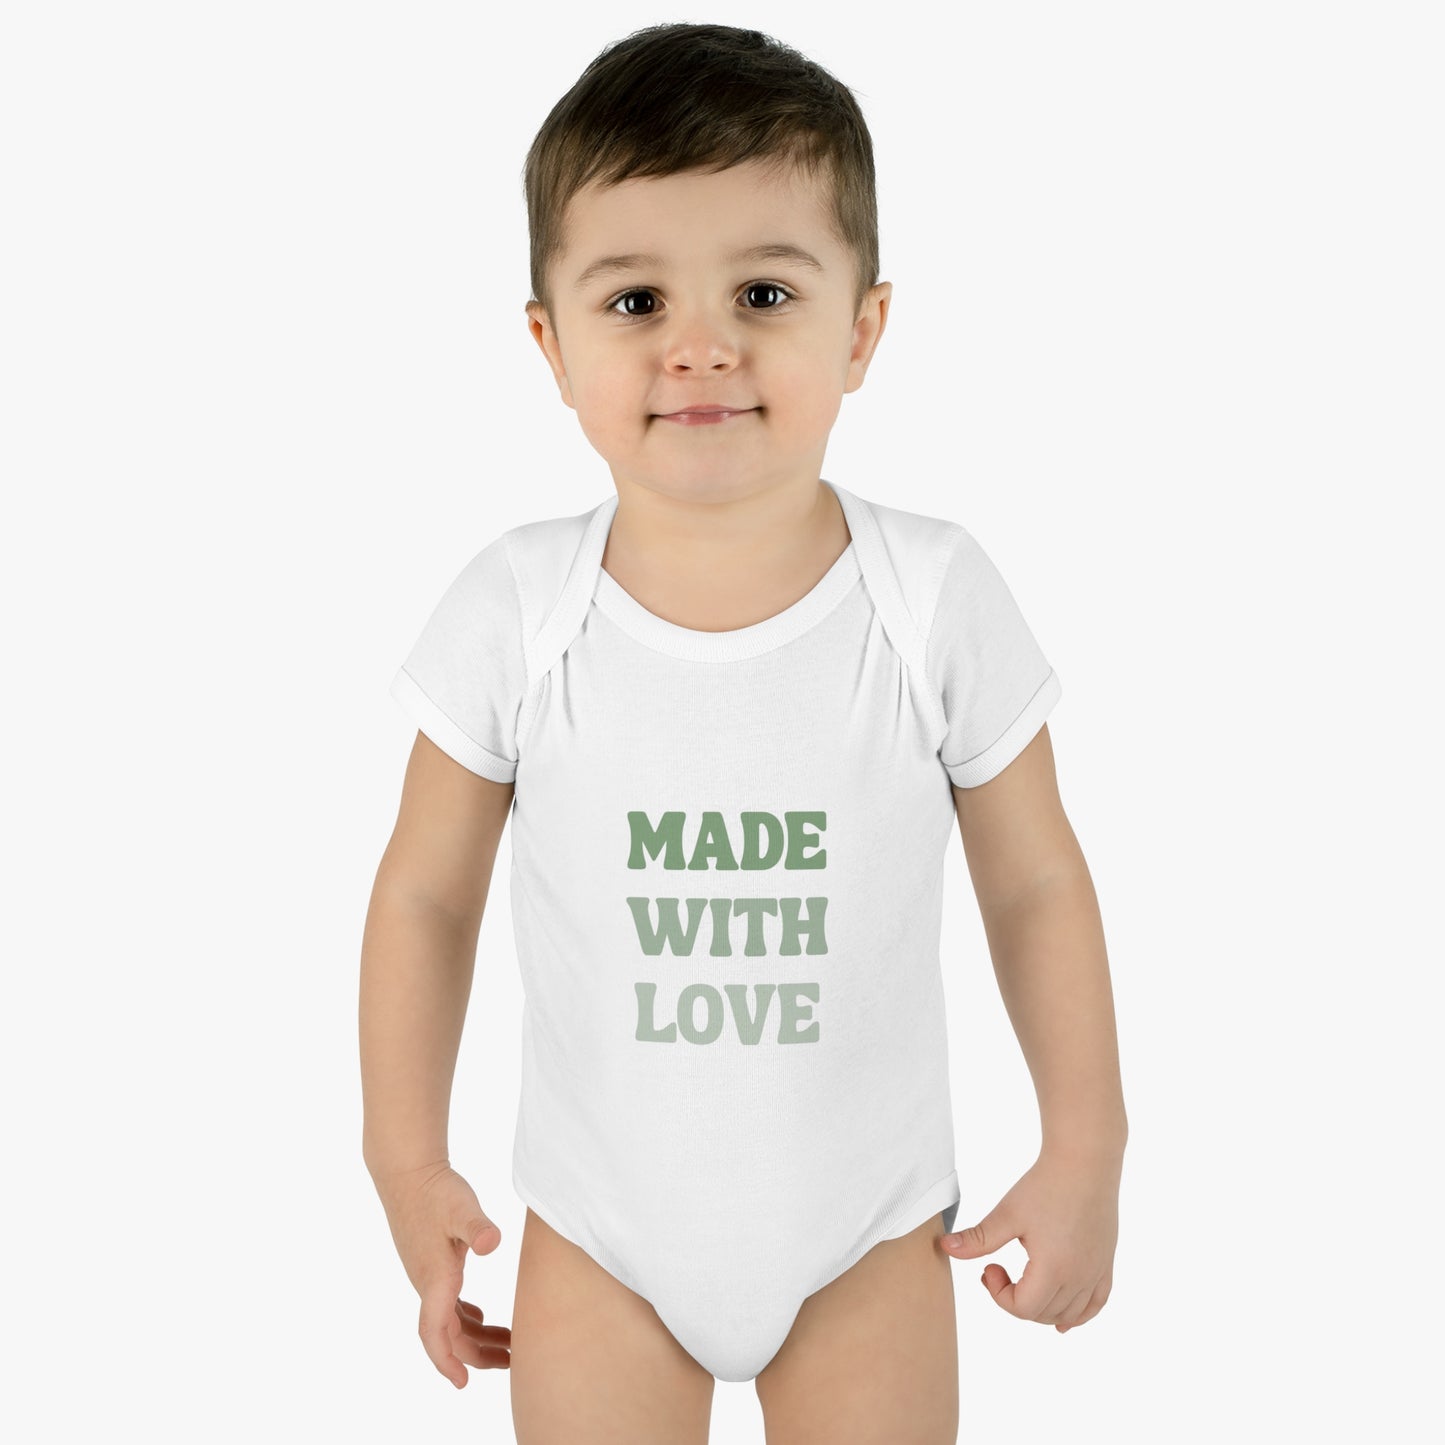 Made with love Baby Bodysuit